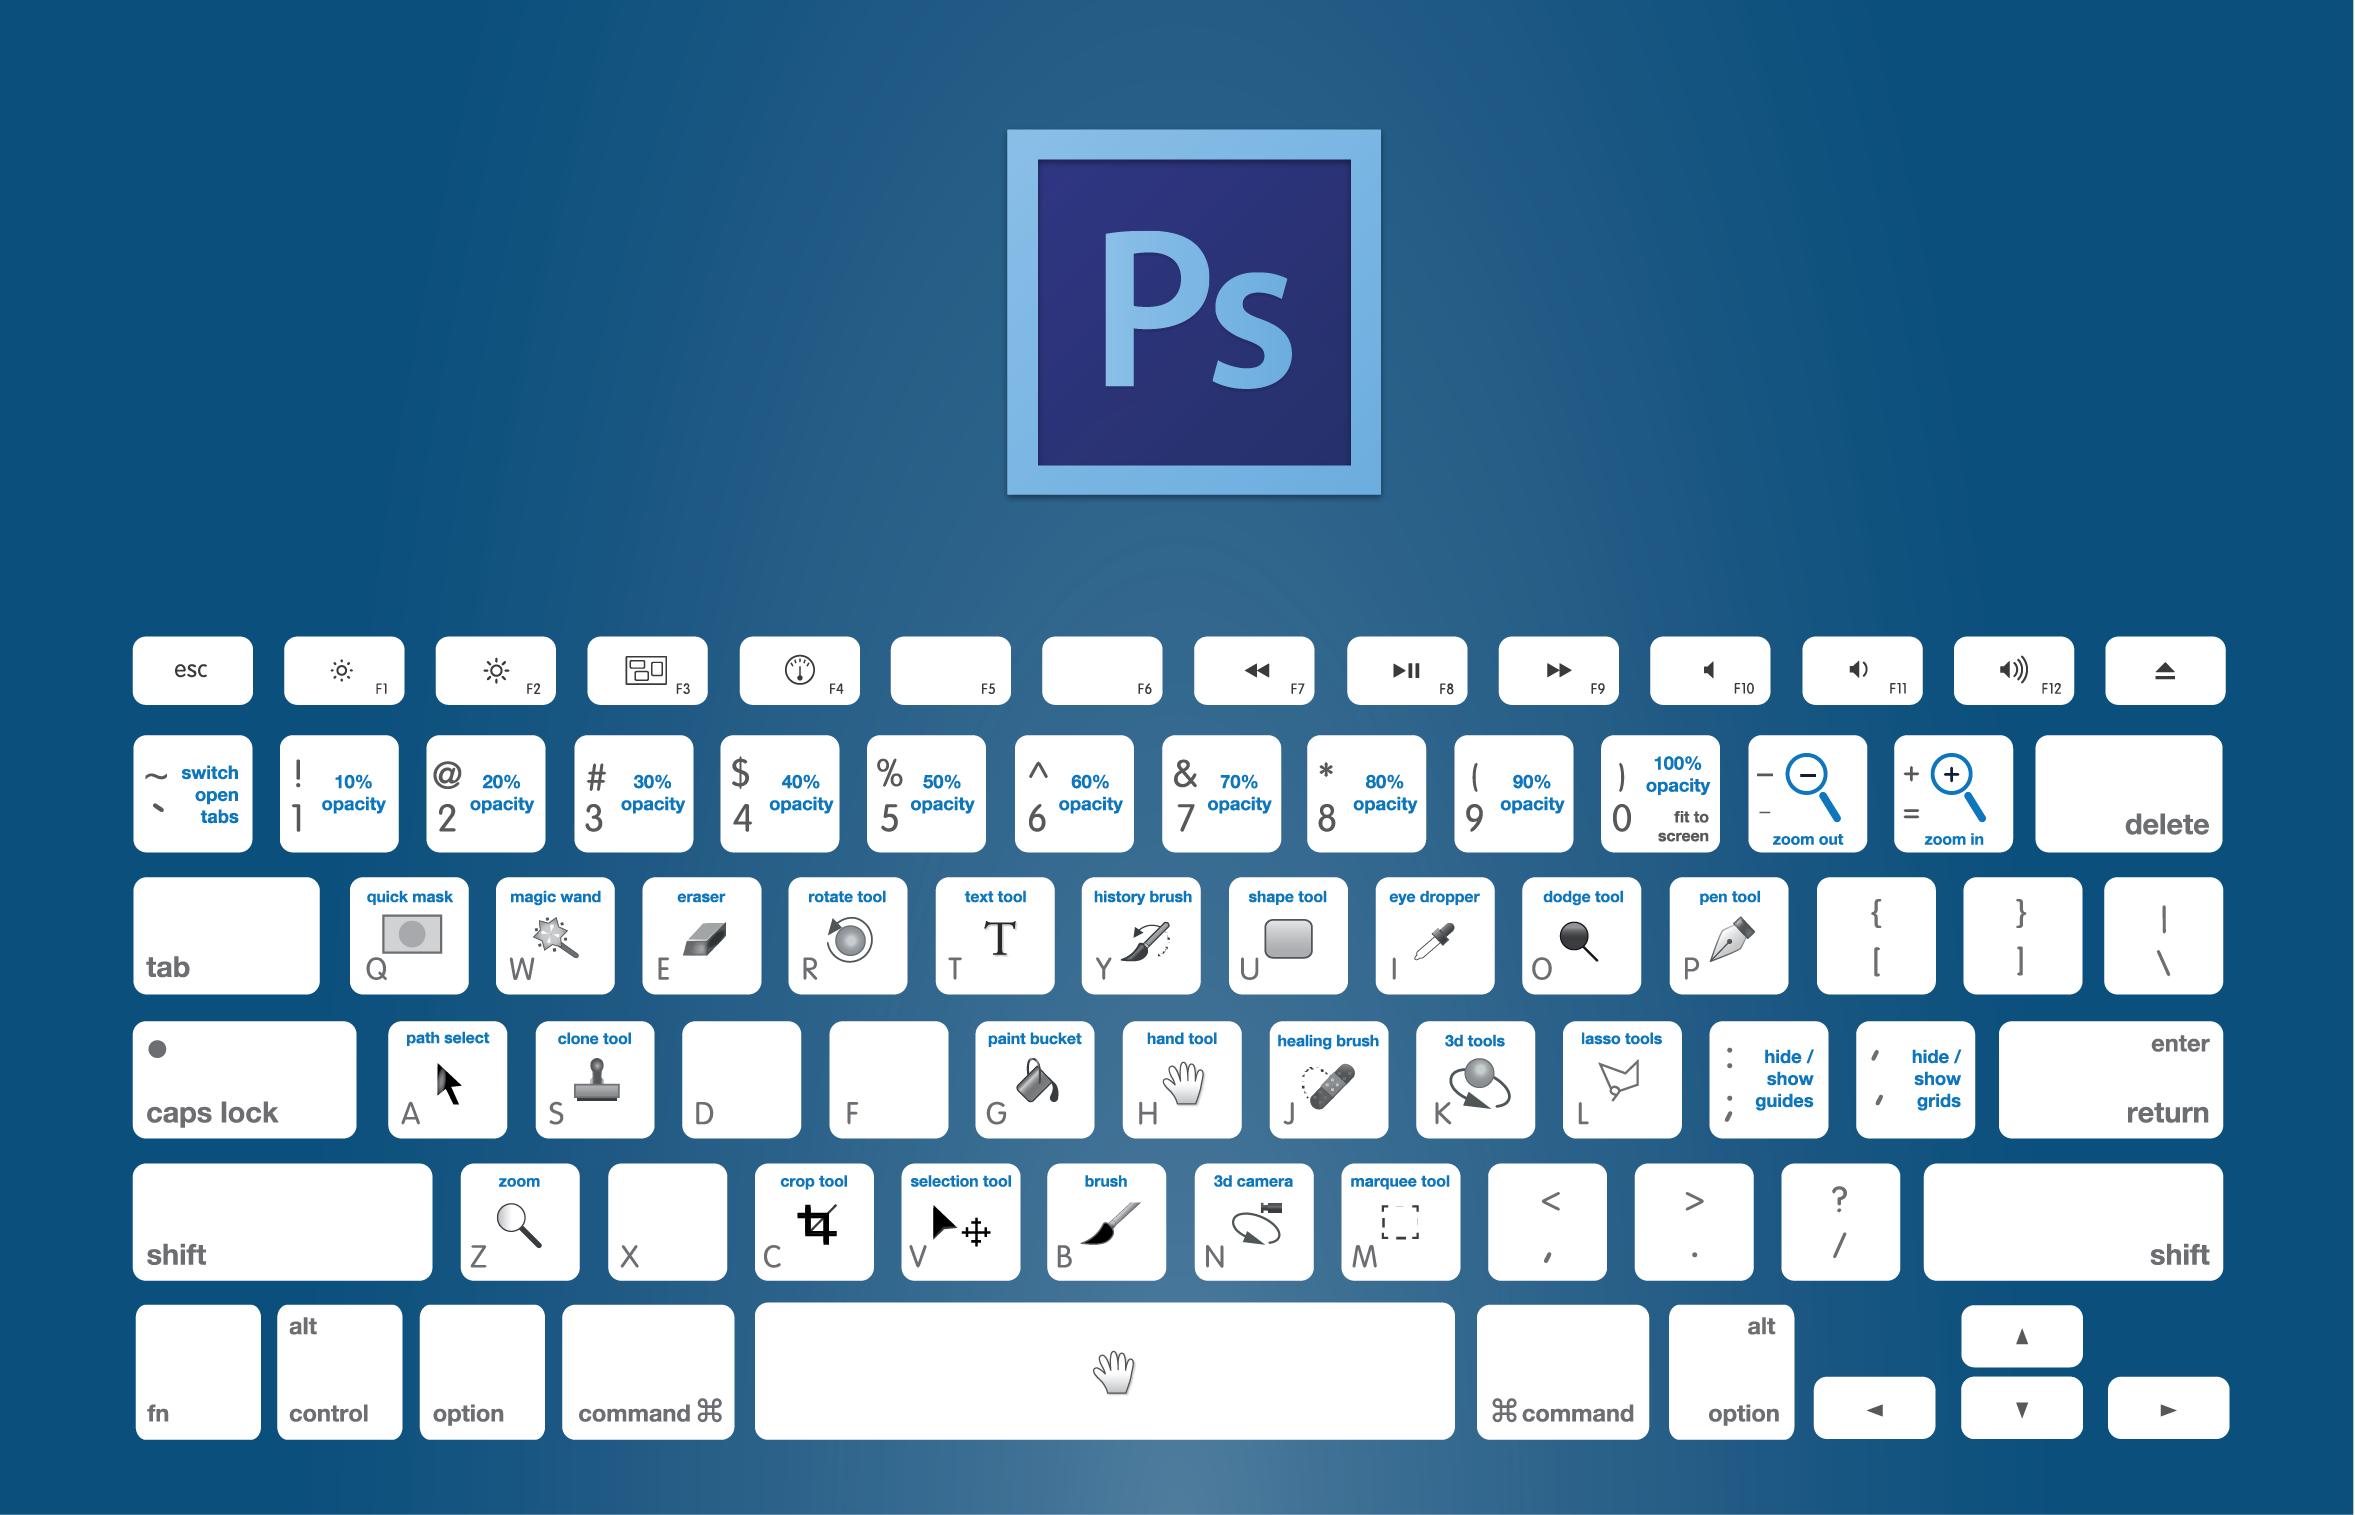 Chart of the keyboard shortcuts to use in Adobe Photoshop: